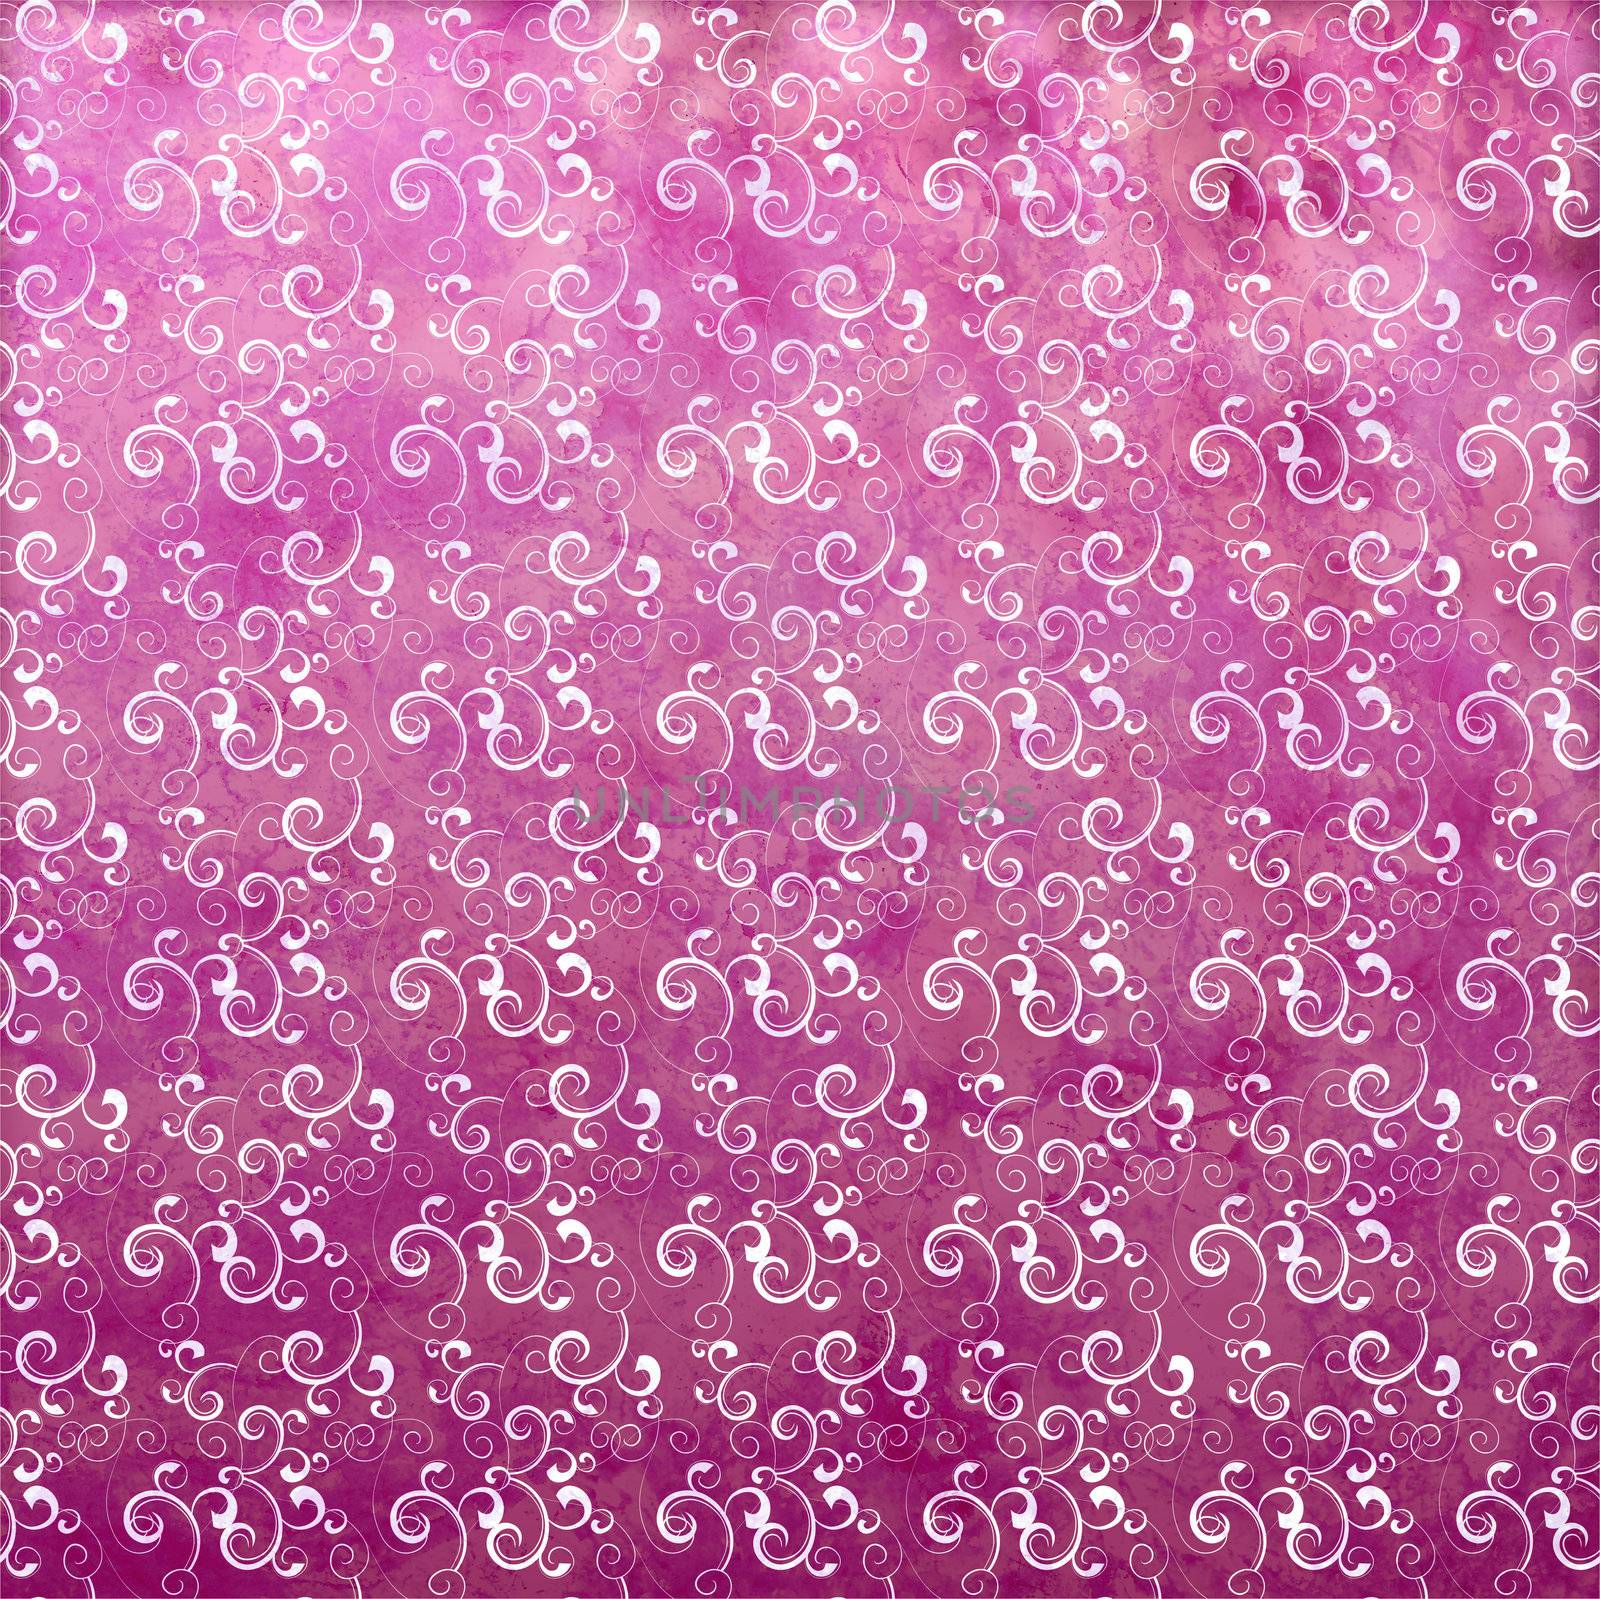 magenta grunge paper background with floral pattern